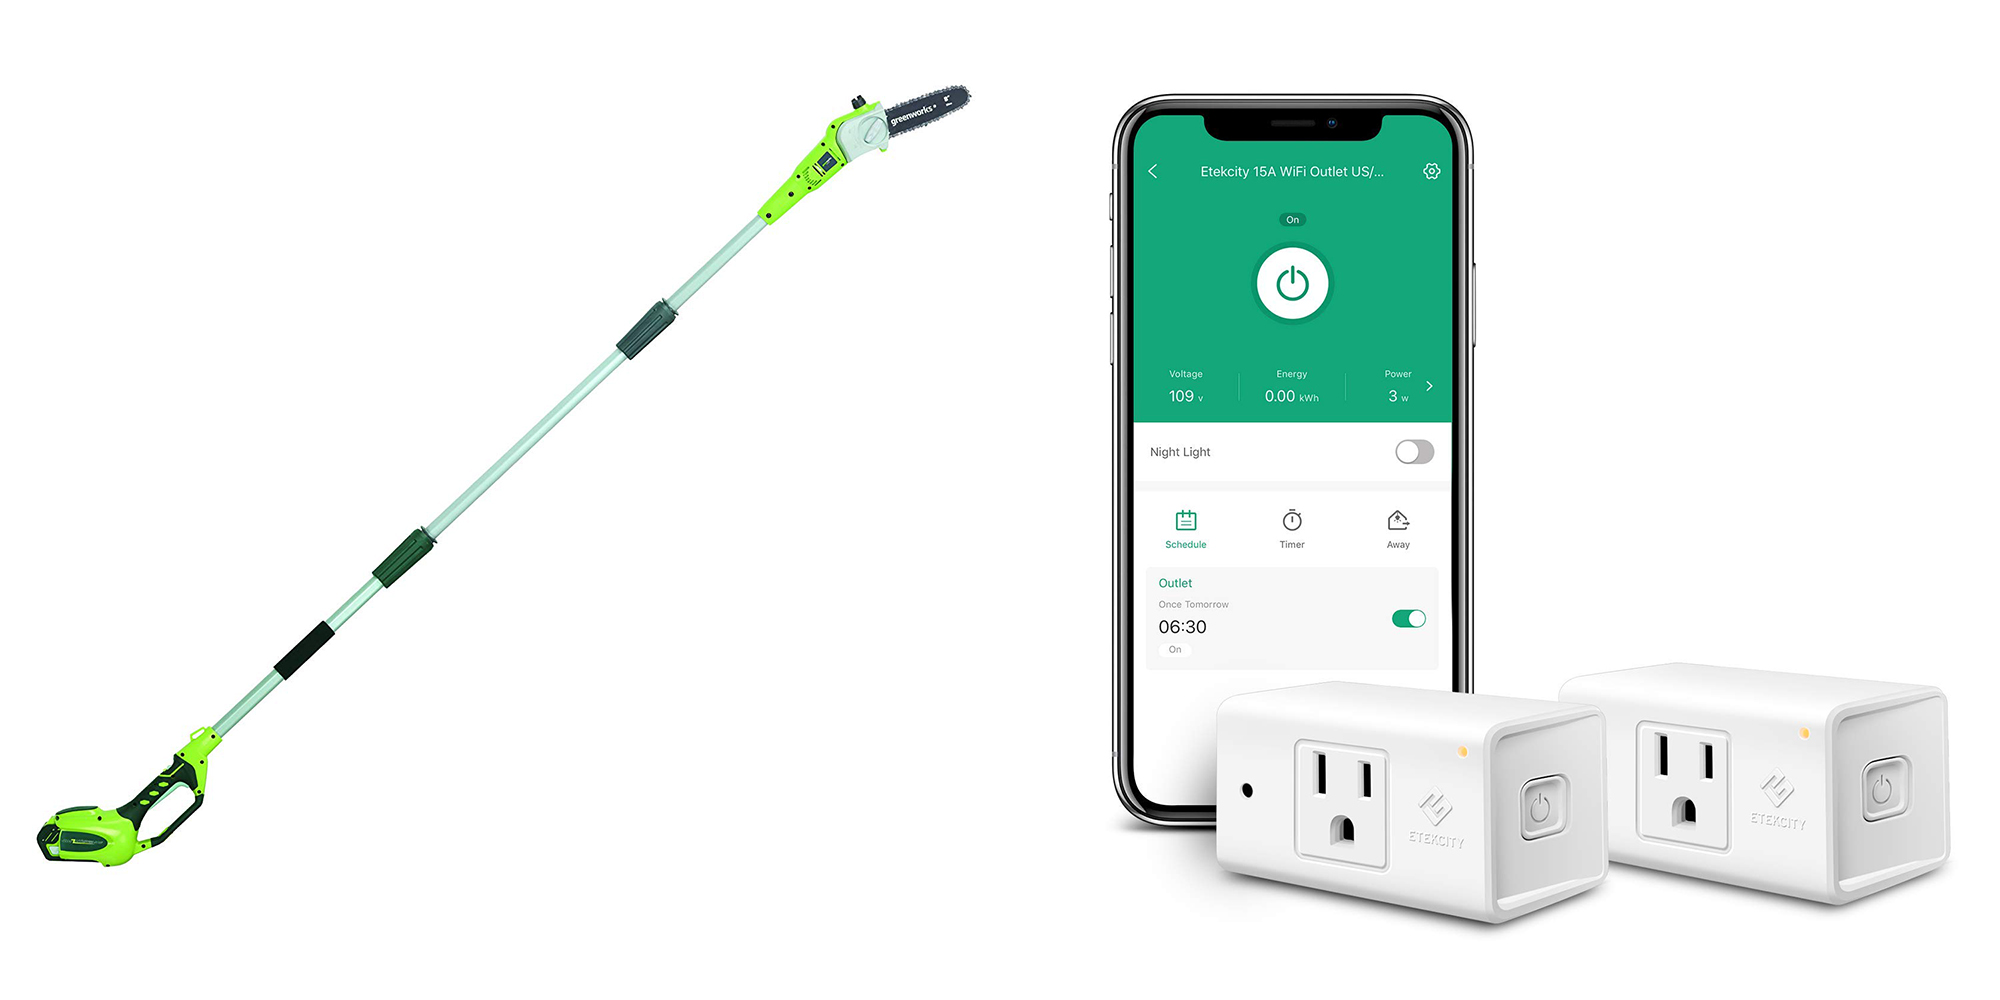 Save on a Greenworks Electric Pole Saw, Smart Plugs and more in today’s Green Deals